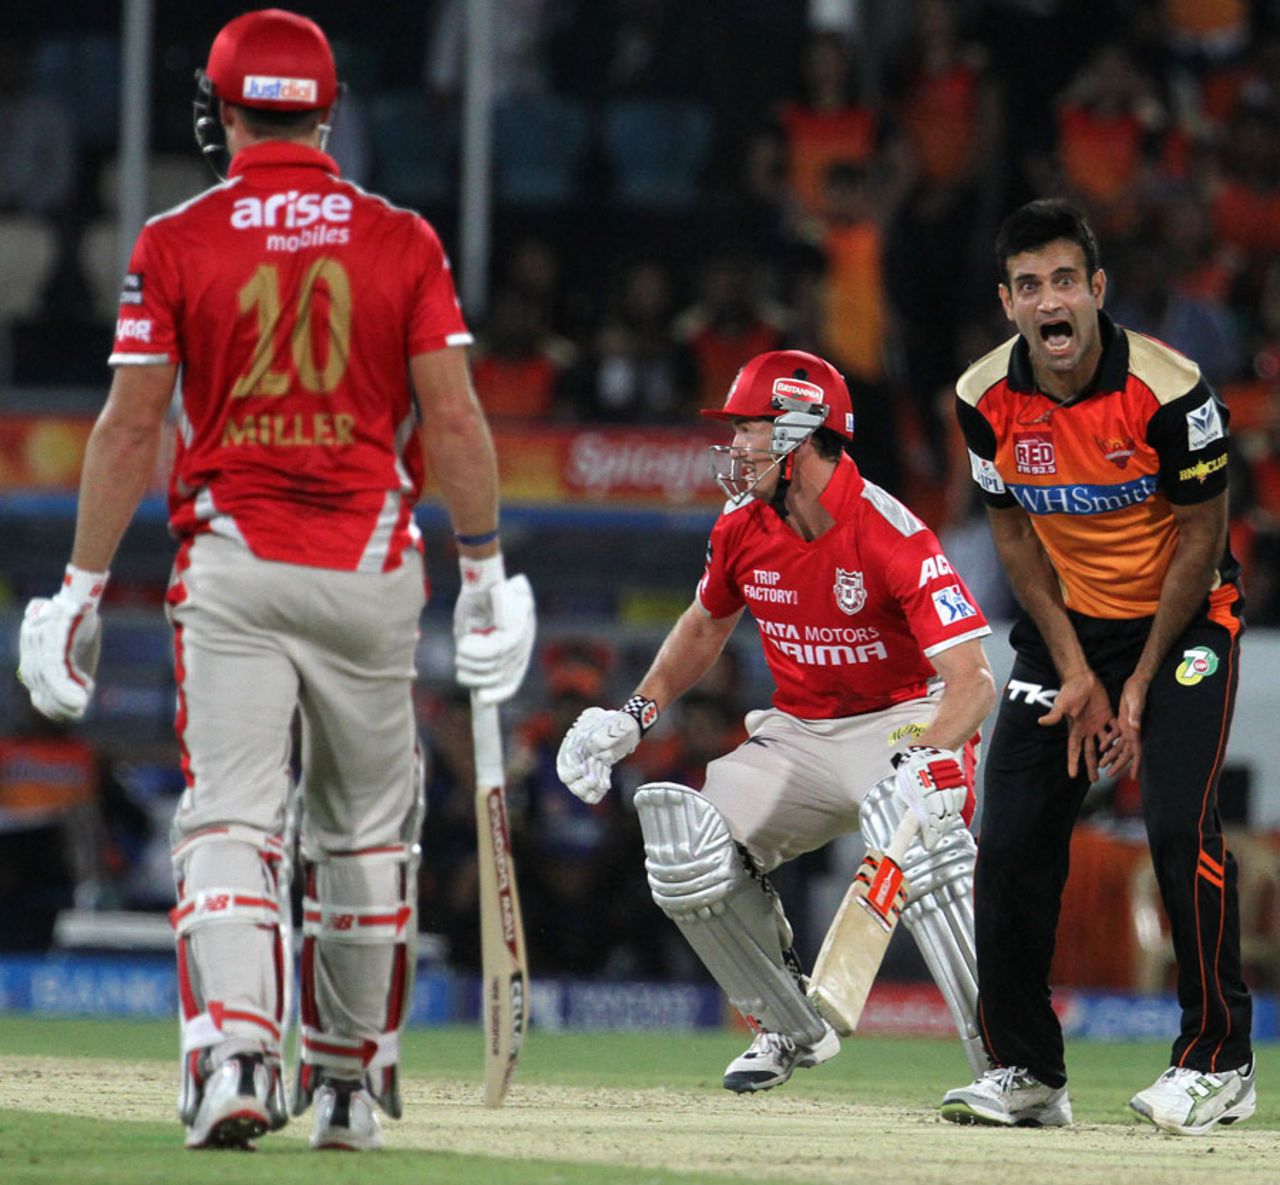 Irfan Pathan appeals for the wicket of George Bailey, Sunrisers Hyderabad v Kings XI Punjab, IPL 2014, Hyderabad, May 14, 2014